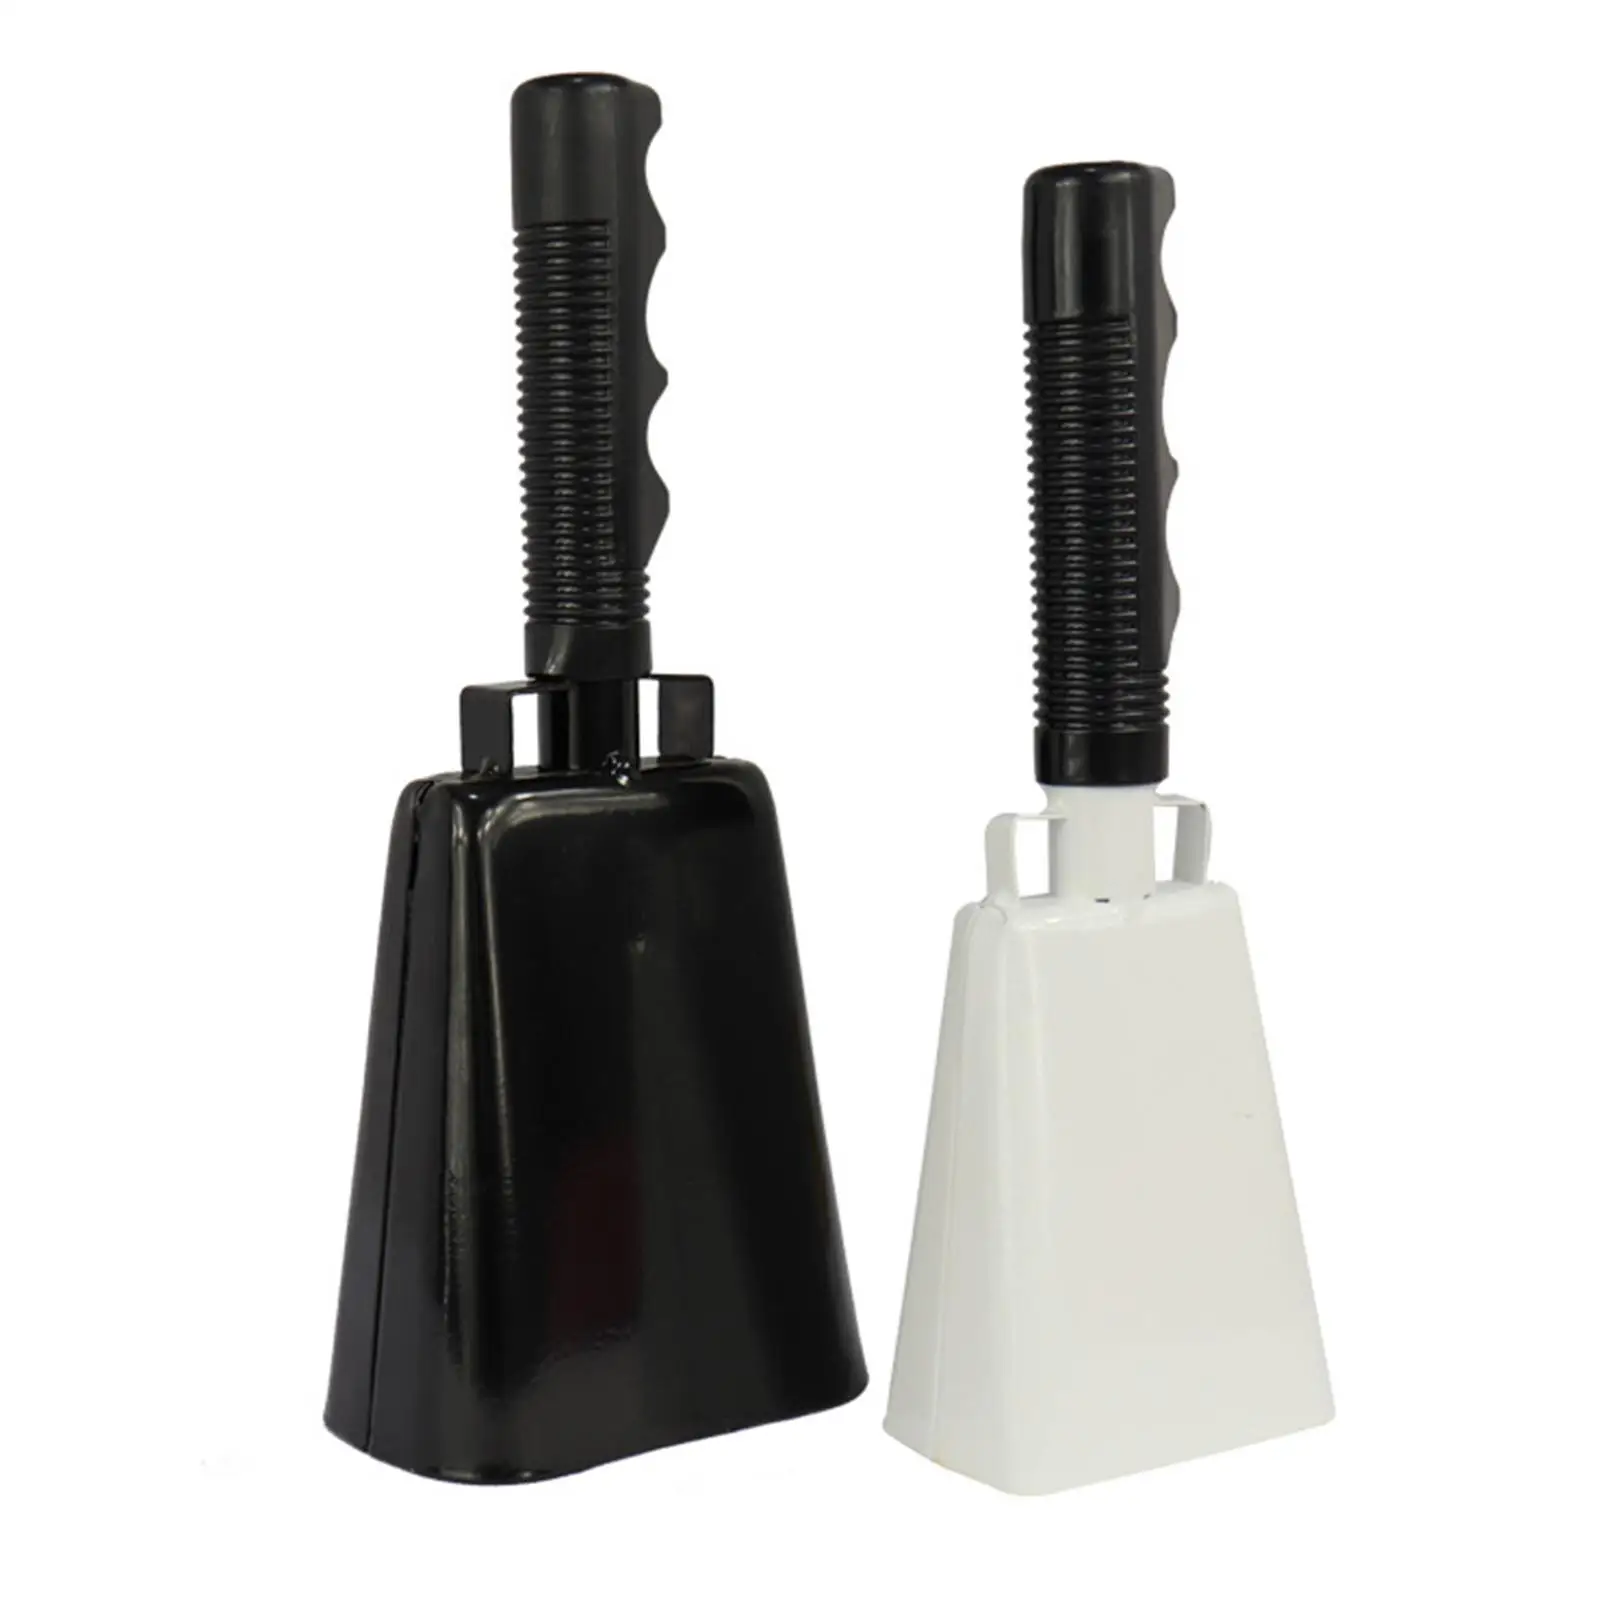 Musical Hand Bells Service Call Bell Percussion with Handles Music Instrument for Rhythm Concert